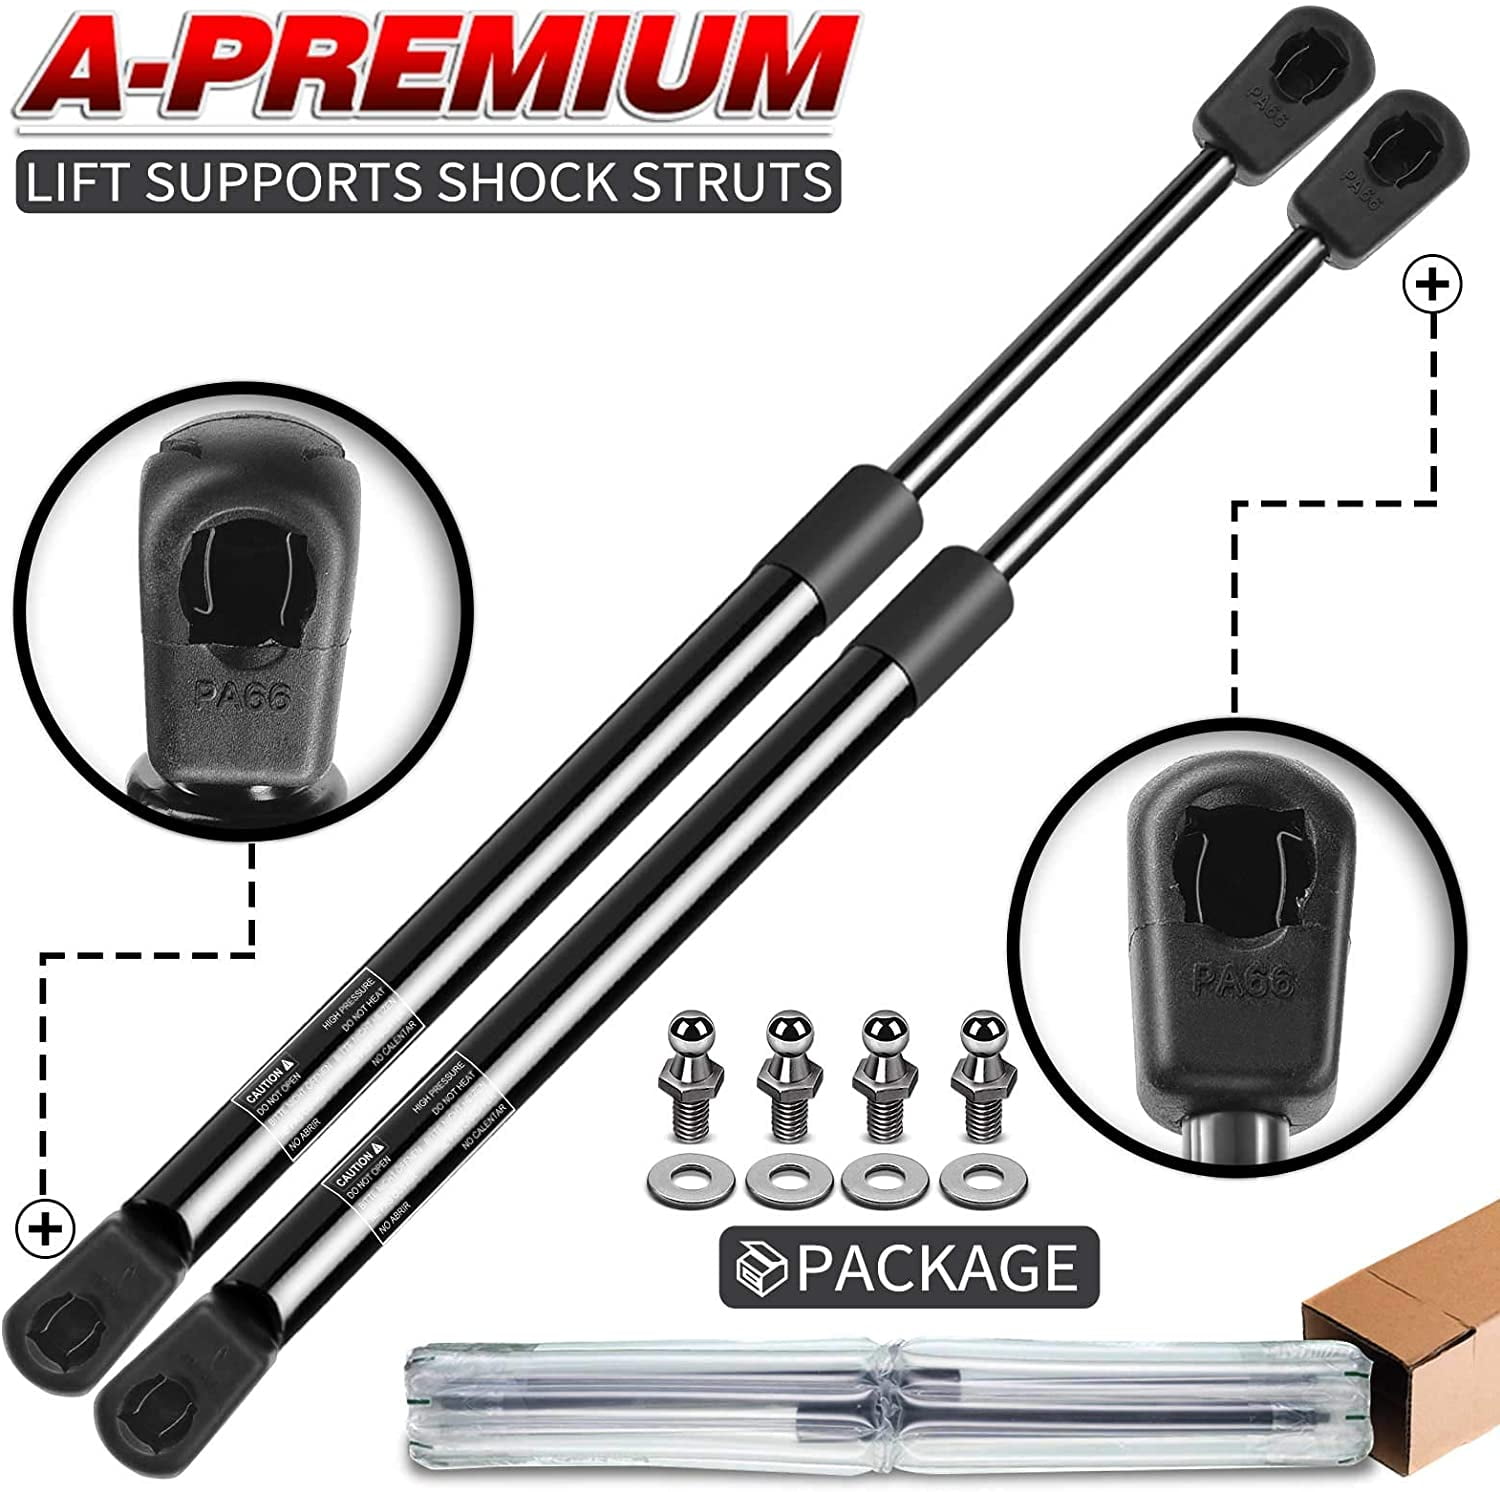 A-Premium 22.87 inch 37lb Lift Supports Gas Spring Shock Struts Replacement for Toolbox Cabinets Sliding Window Storage Bed Bench Lids Basement Door 2-PC Set